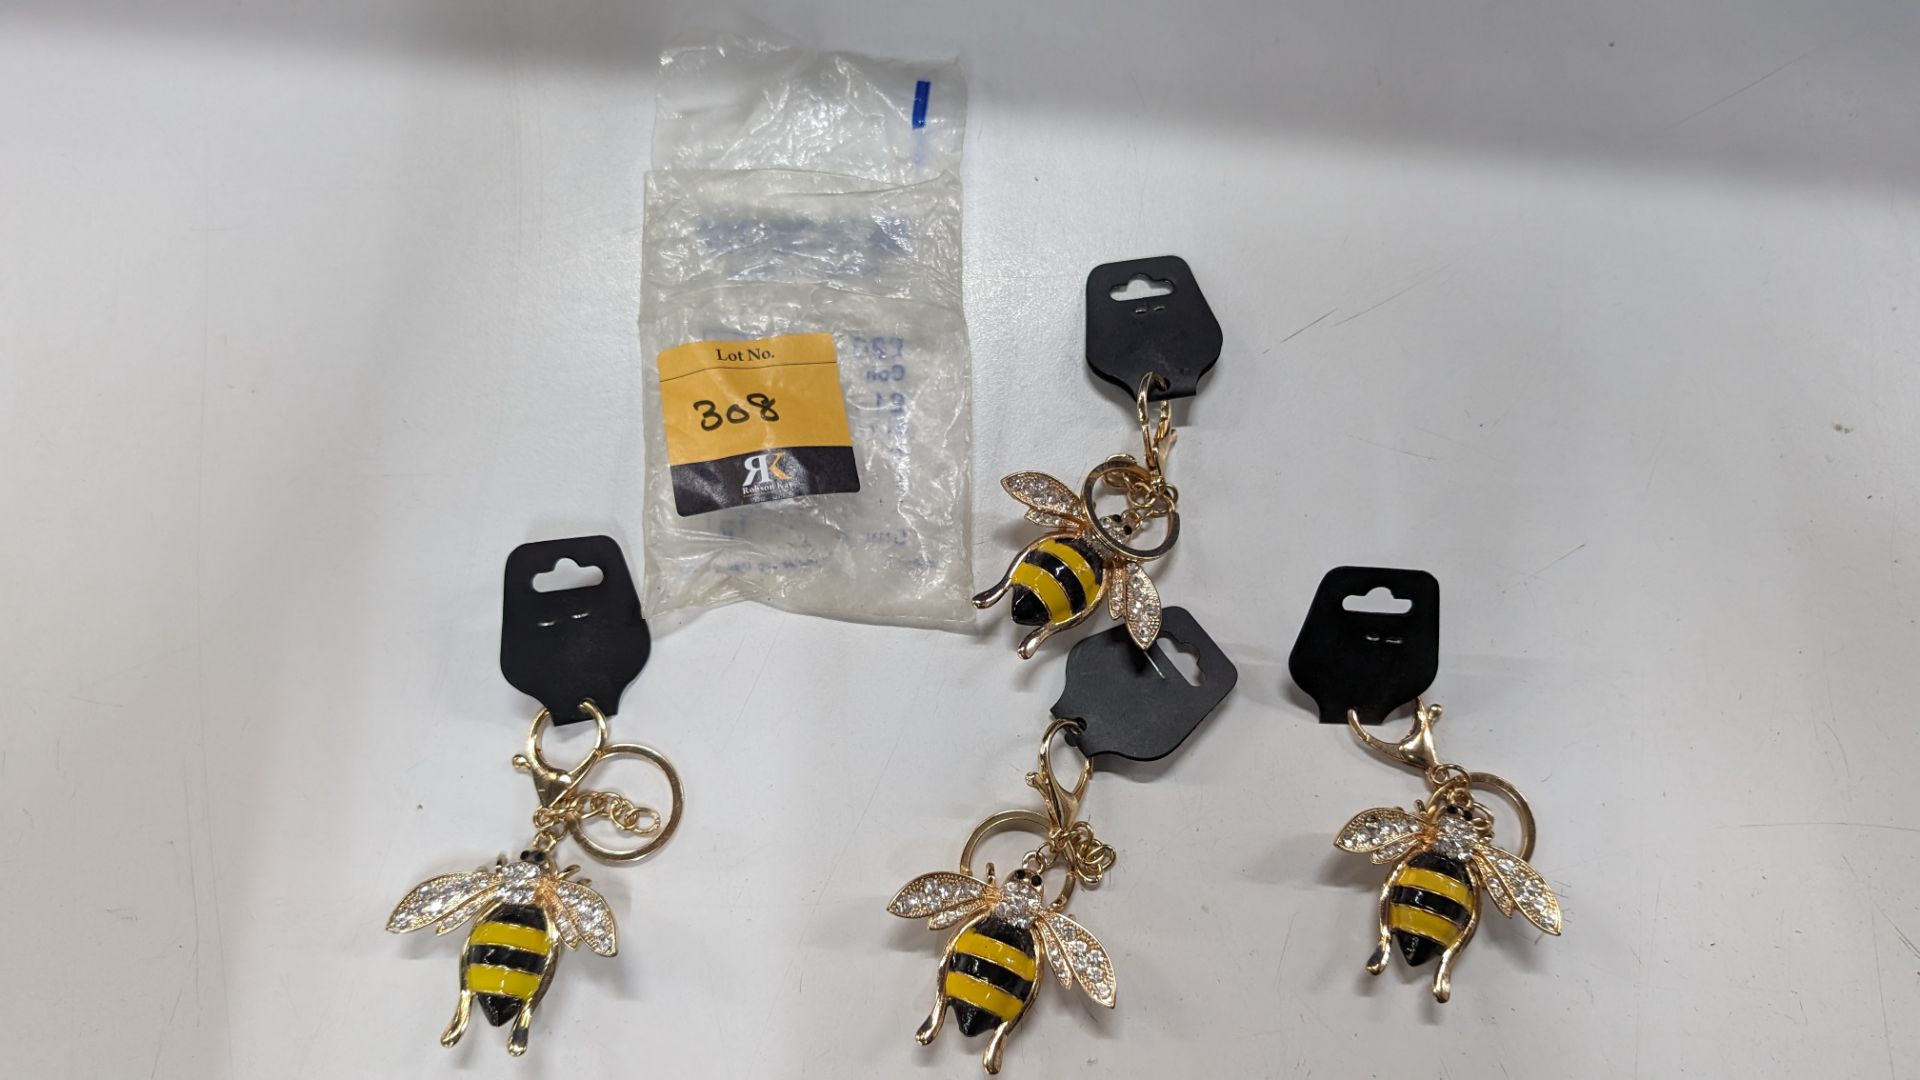 4 off highly decorative bee keyrings - Image 2 of 6